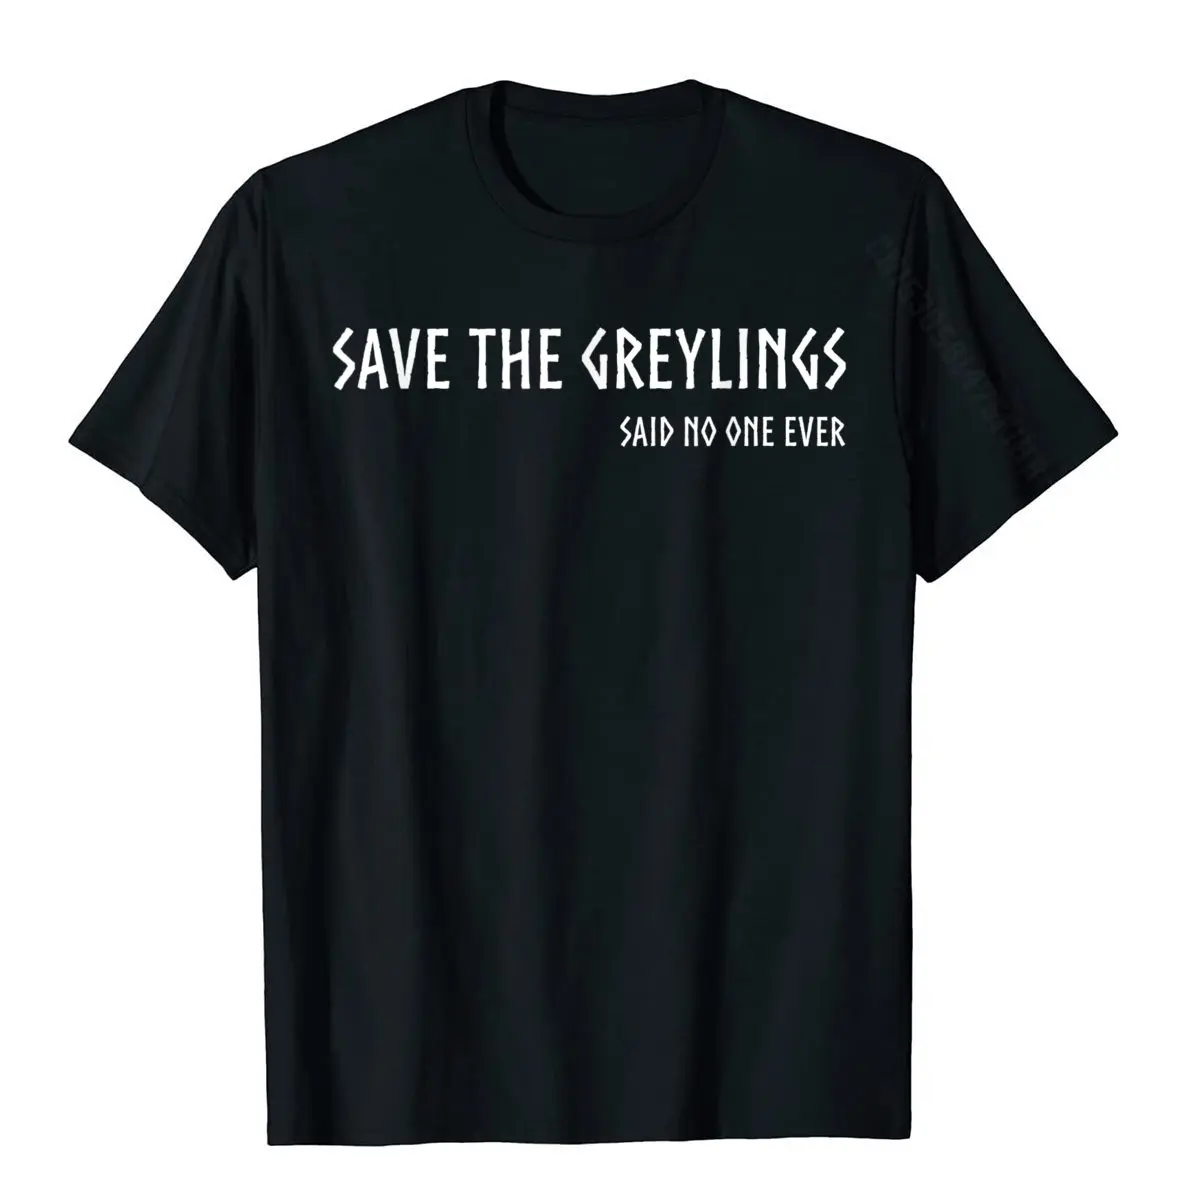 Save The Greylings! Valheim Inspired Viking Funny Gamer T-Shirt Graphic Simple Style Top T-Shirts Cotton Tops Tees For Men Crazy